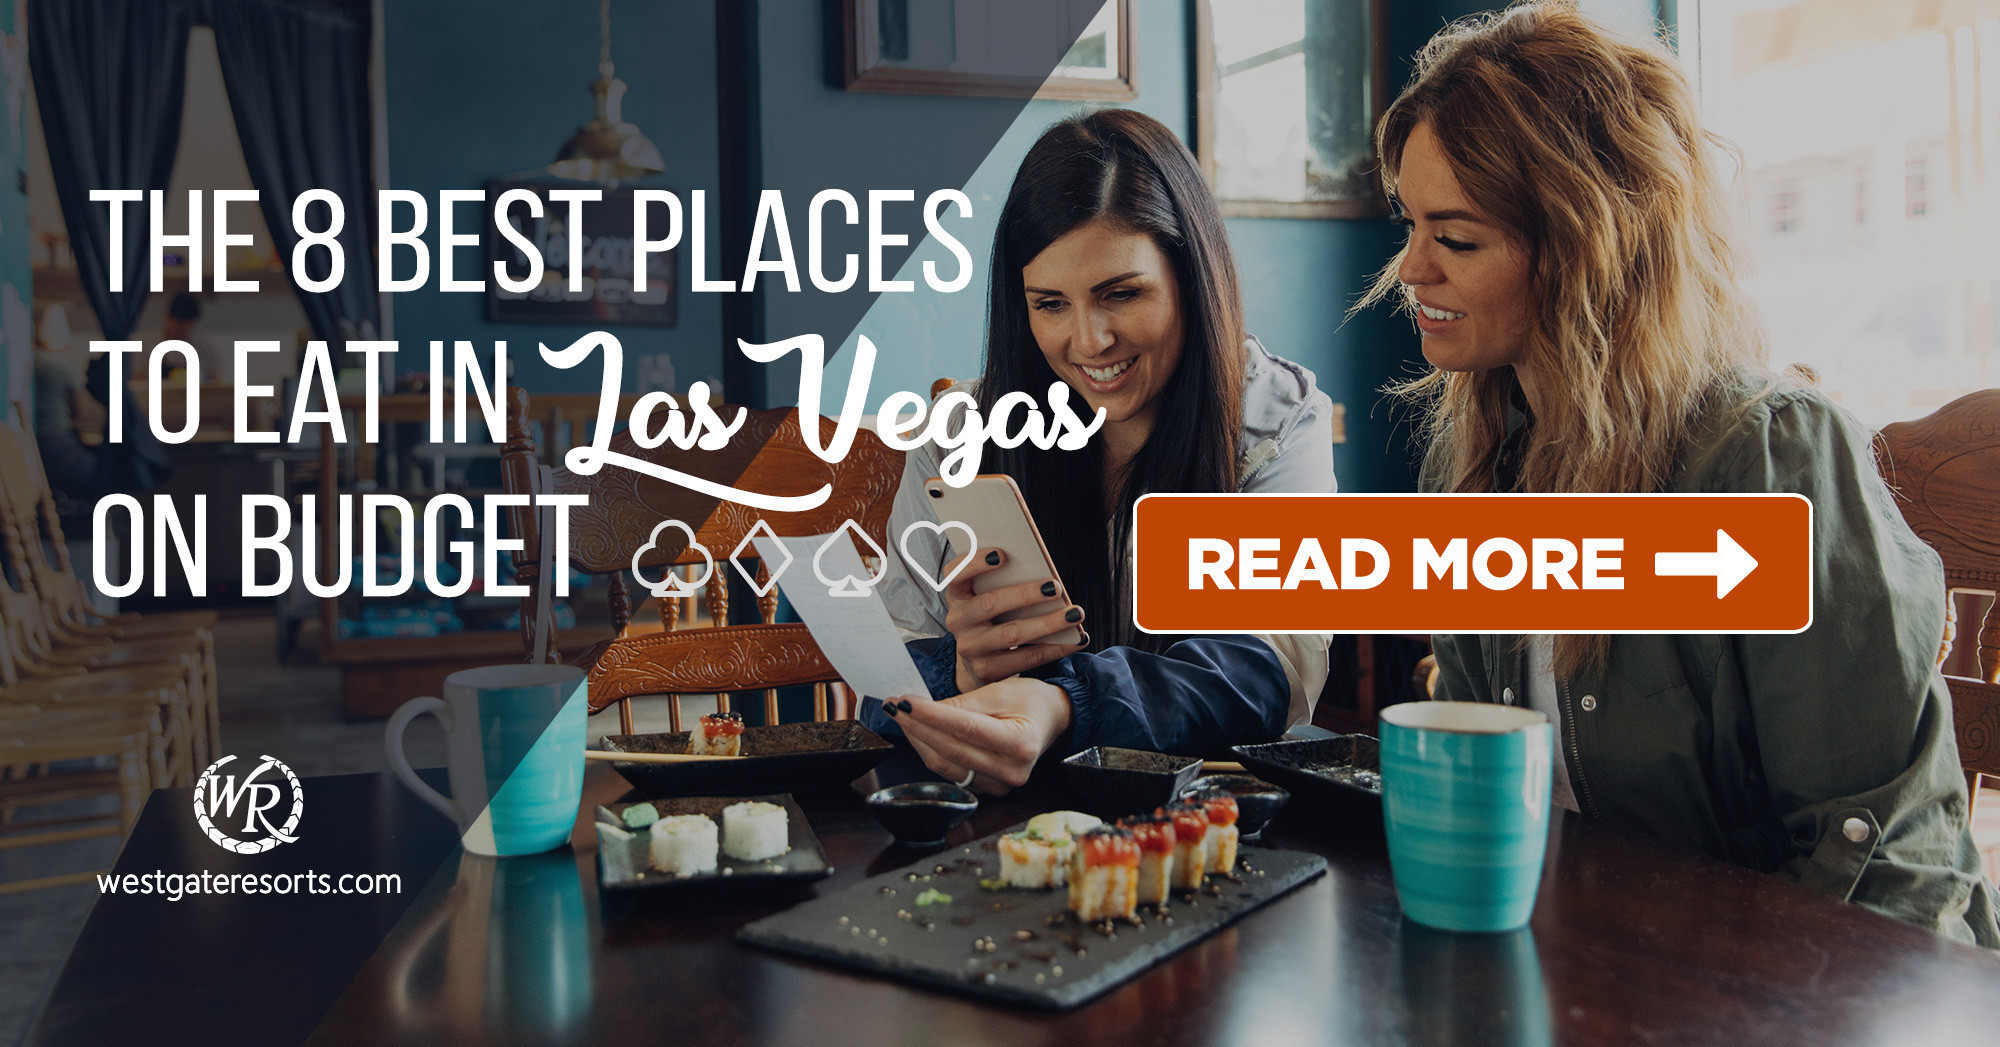 The 8 Best Places to Eat in Las Vegas on a Budget